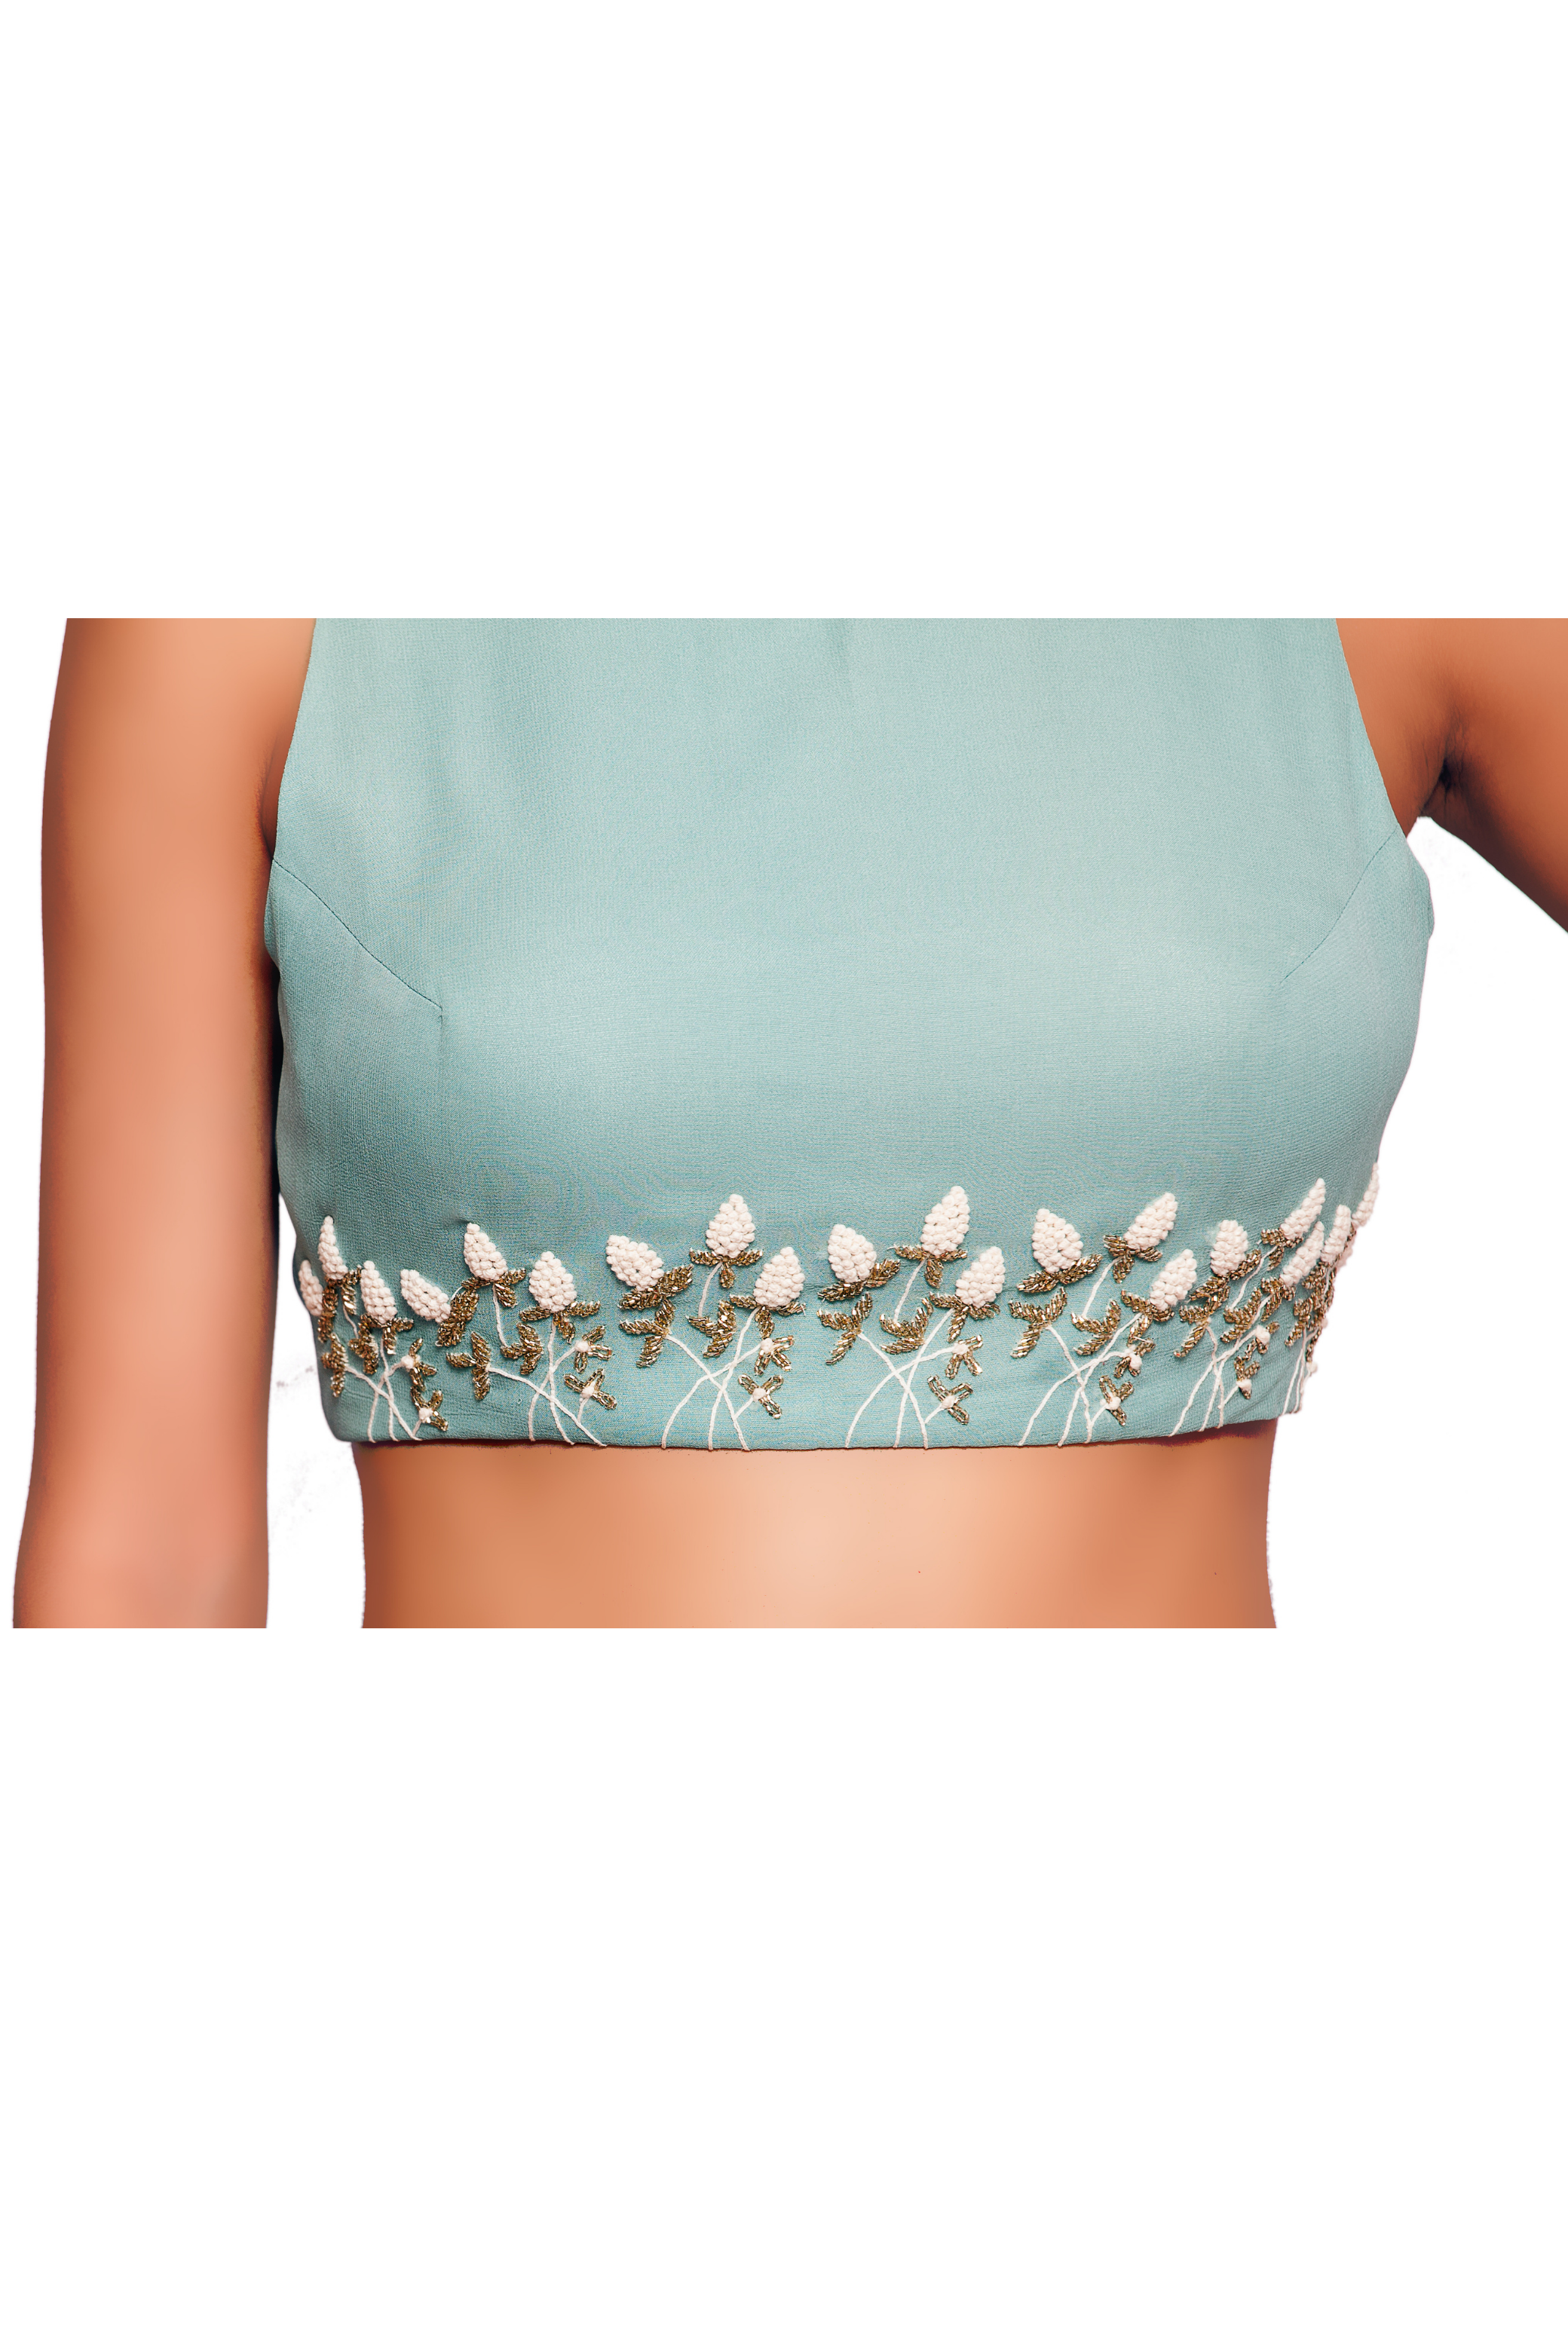 The top is embellished with french knots and cut dana flowers.